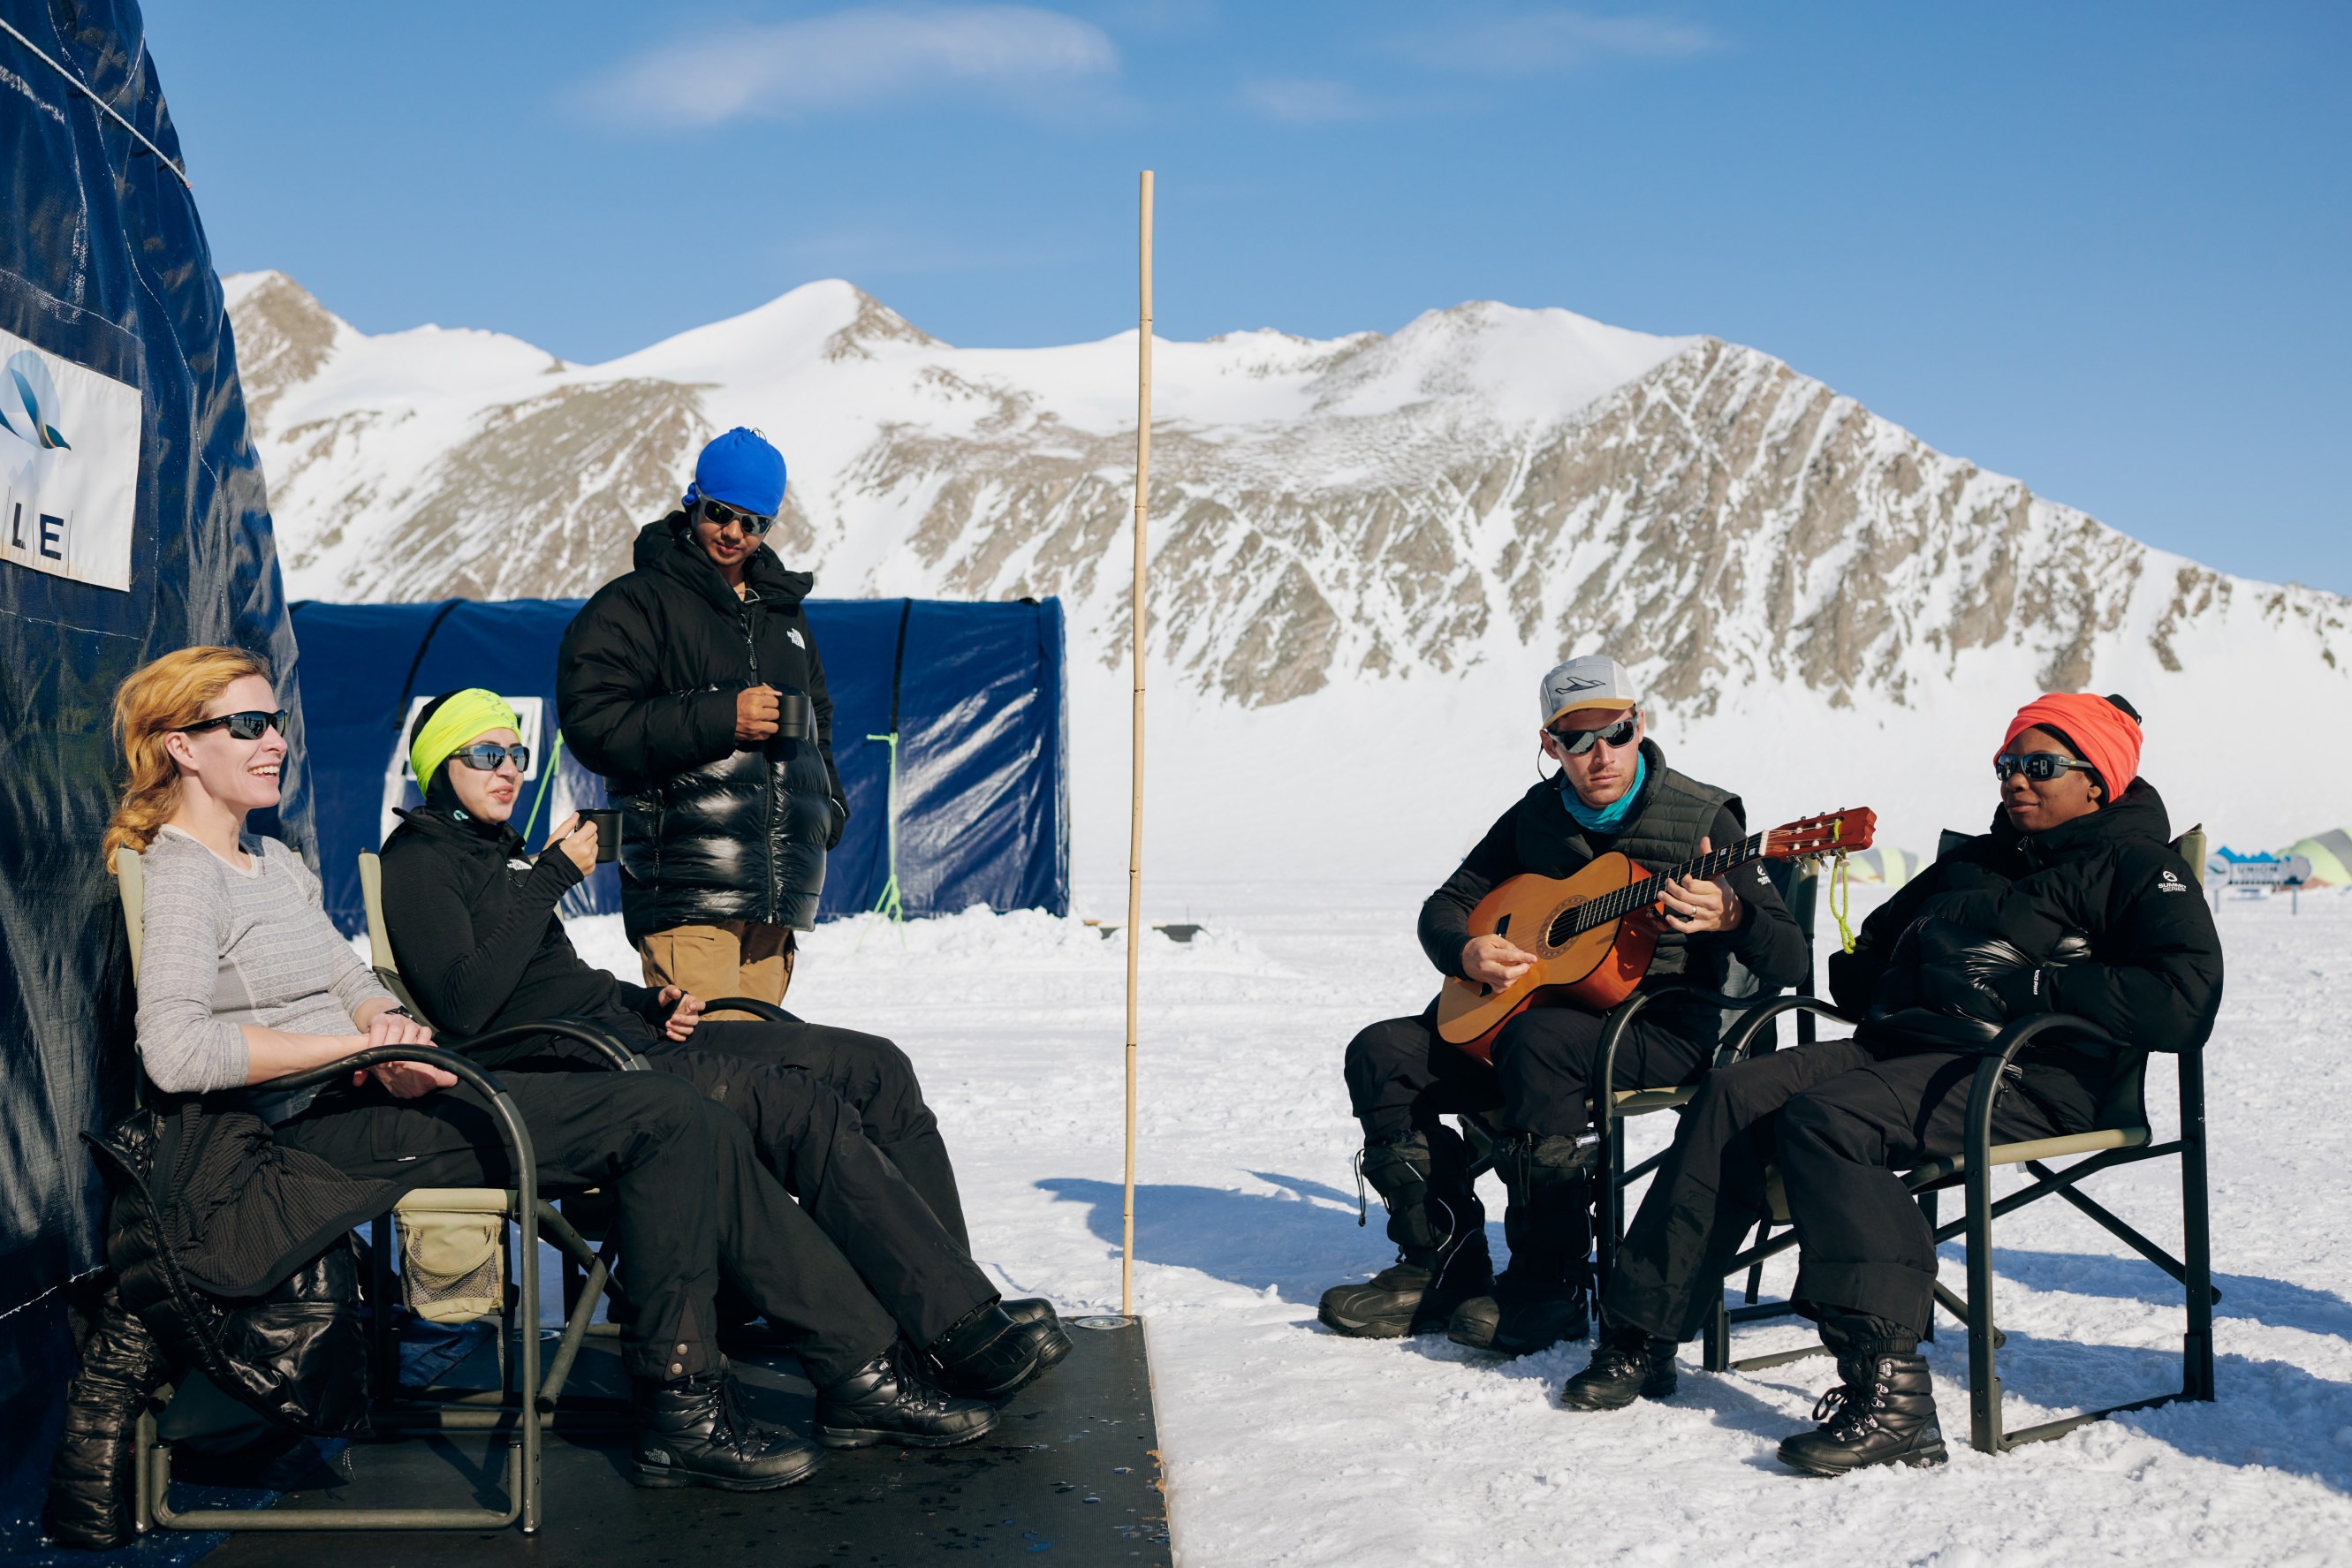 Citizen scientists hangout and play music during down time in Union Glacier camp